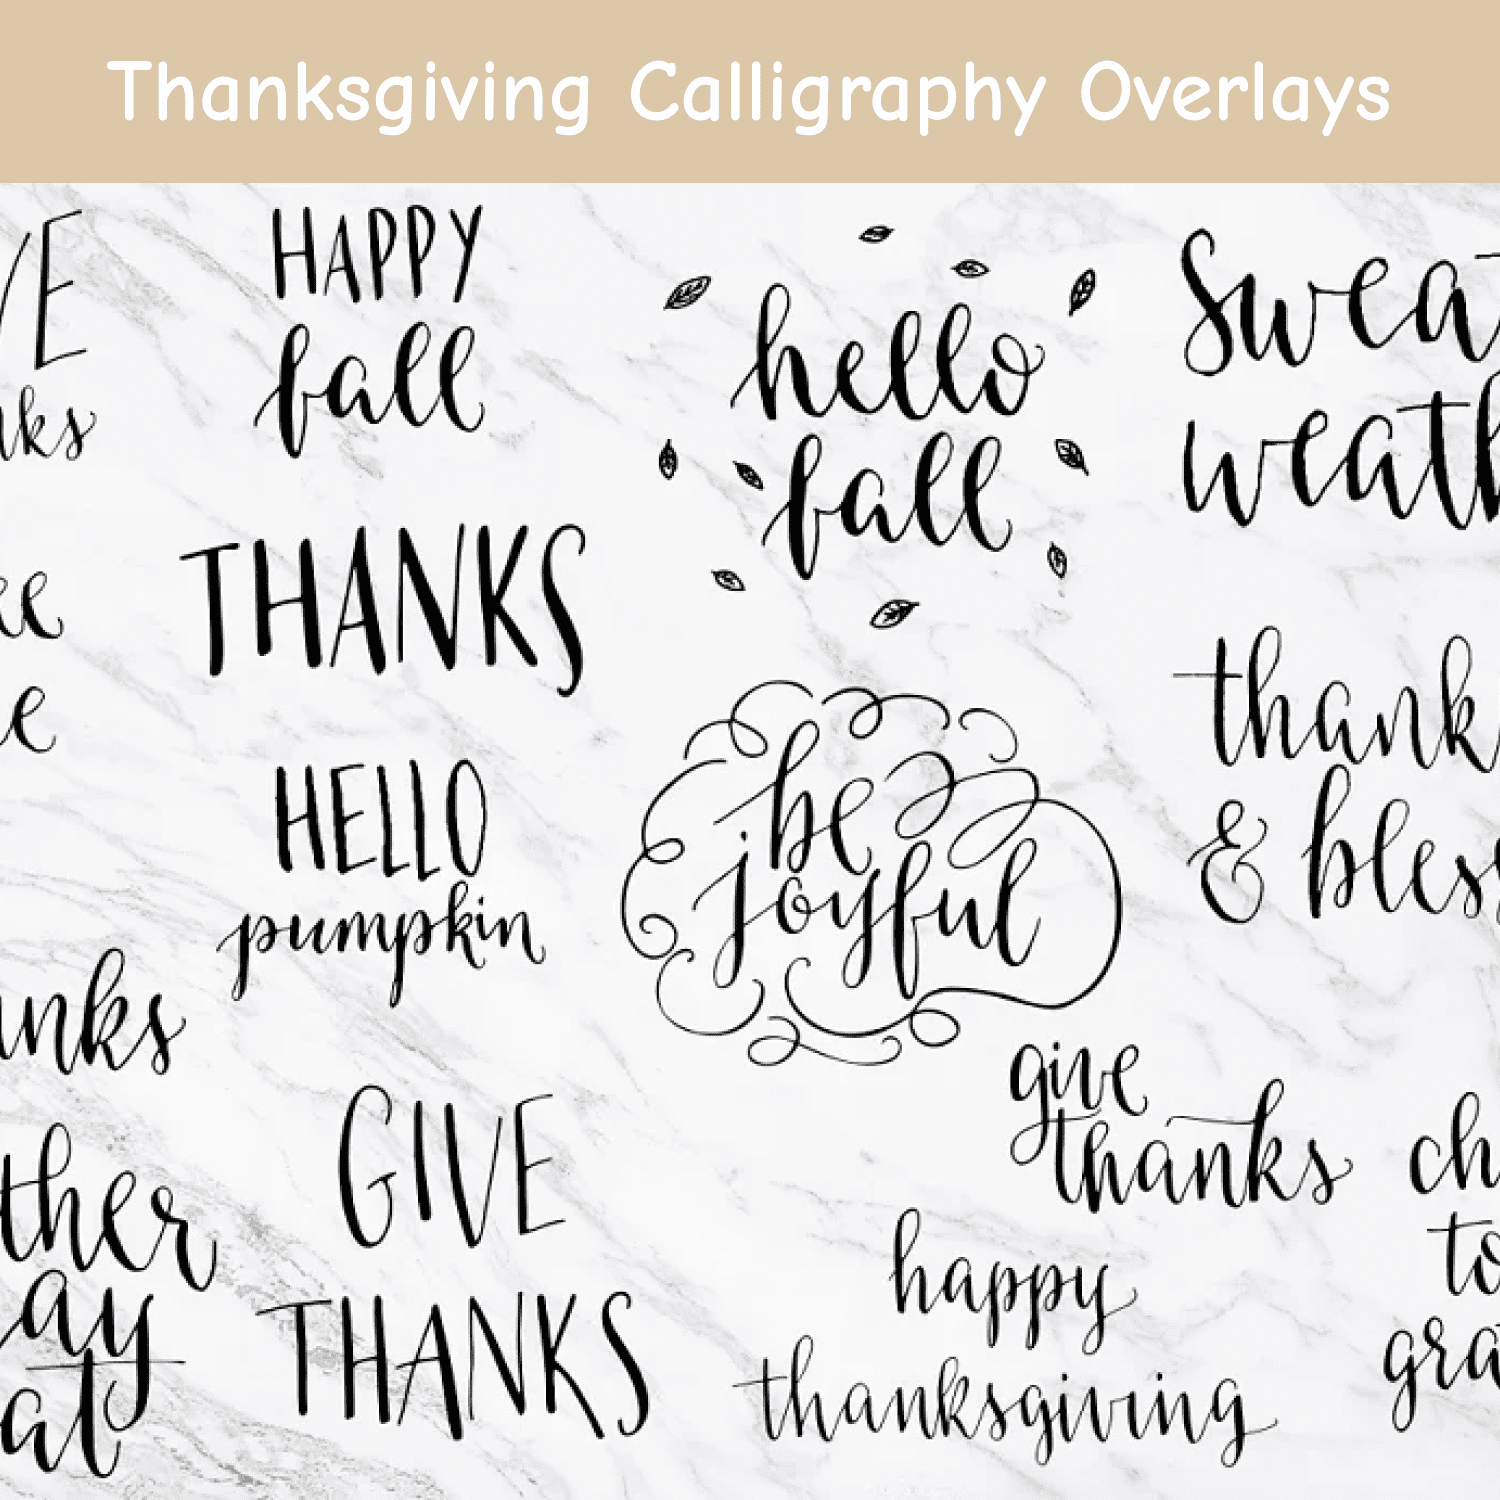 Thanksgiving Calligraphy Overlays.